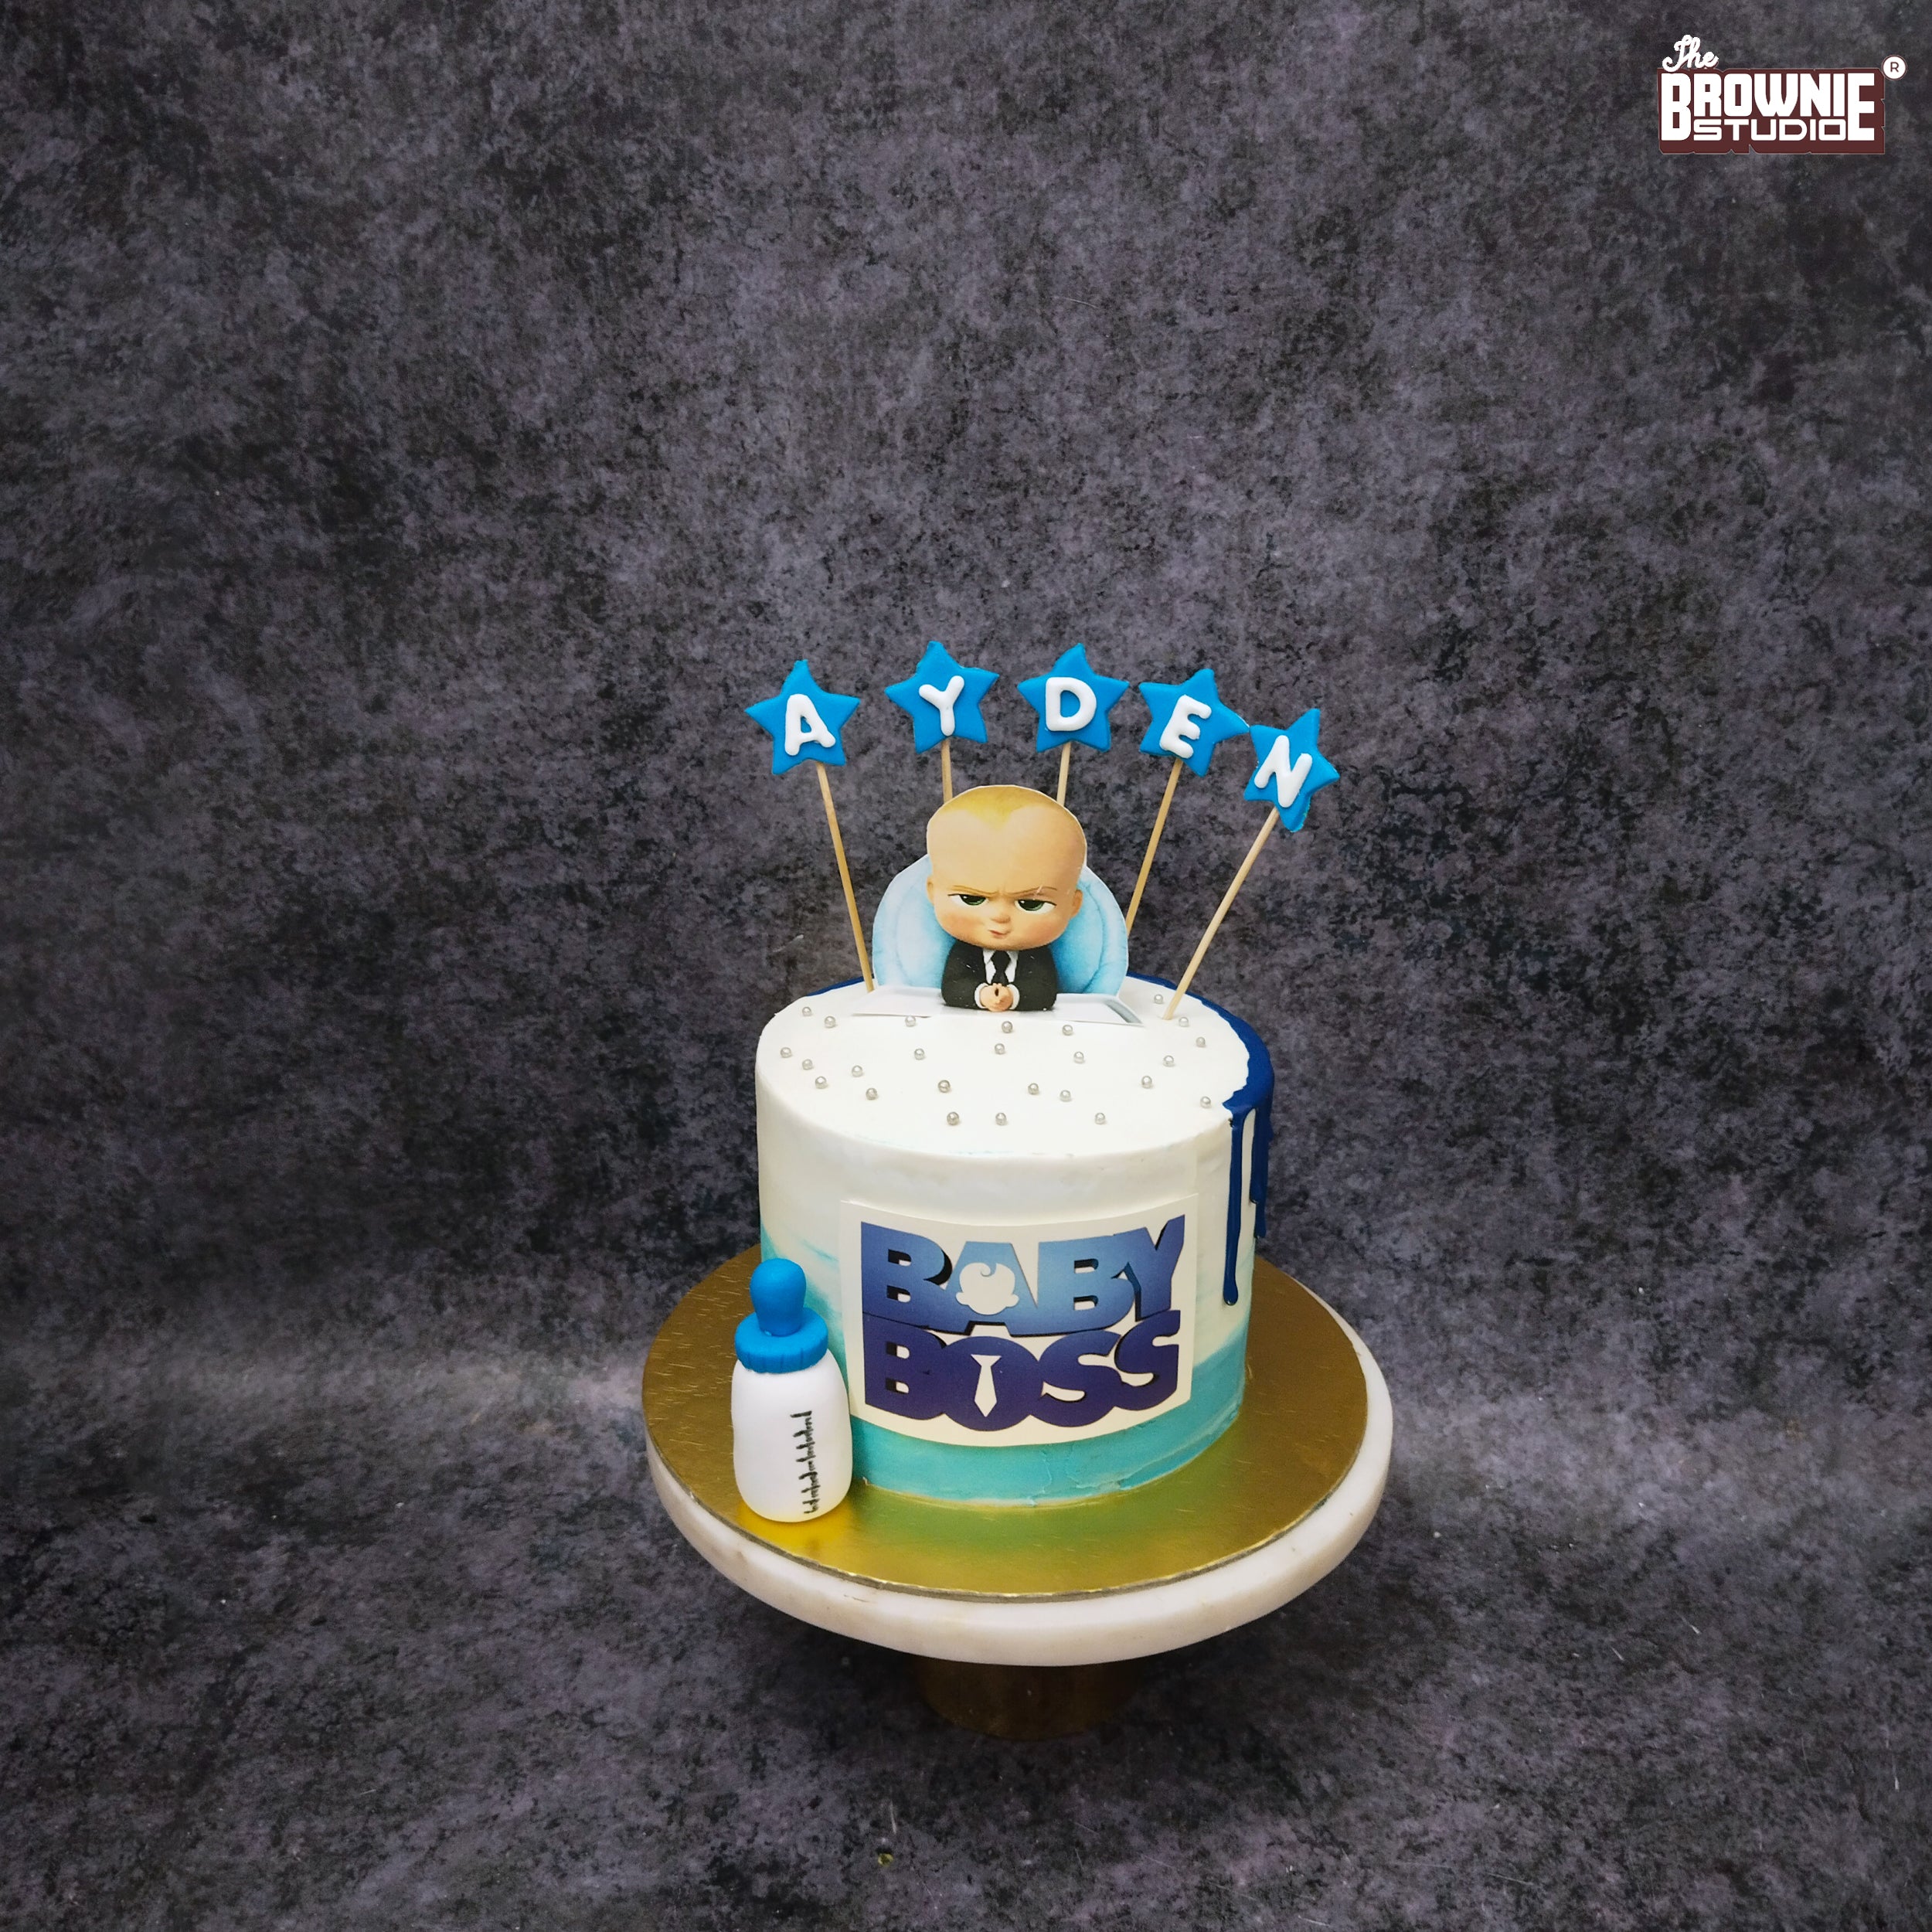 Boss Theme Cake Designs & Images